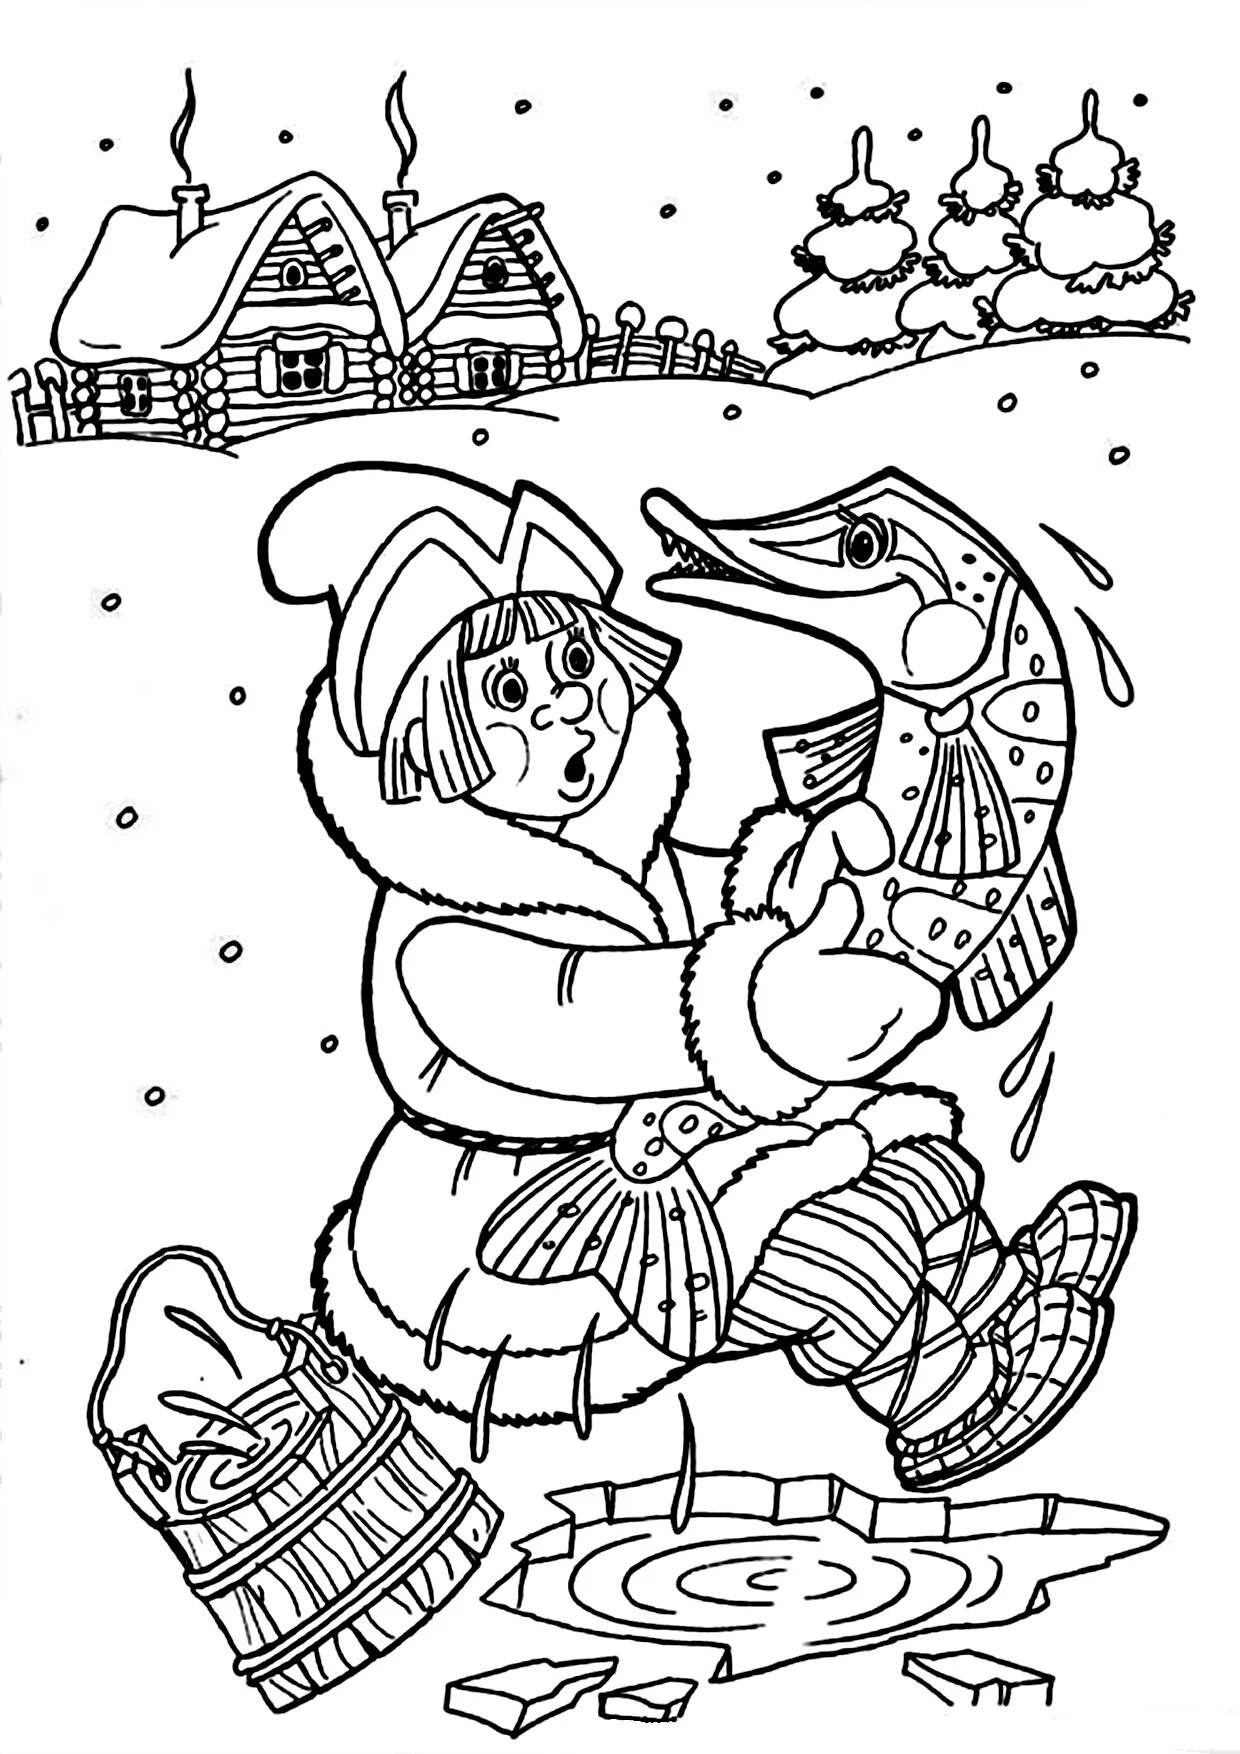 Sublime coloring book based on fairy tales for children Russian folk